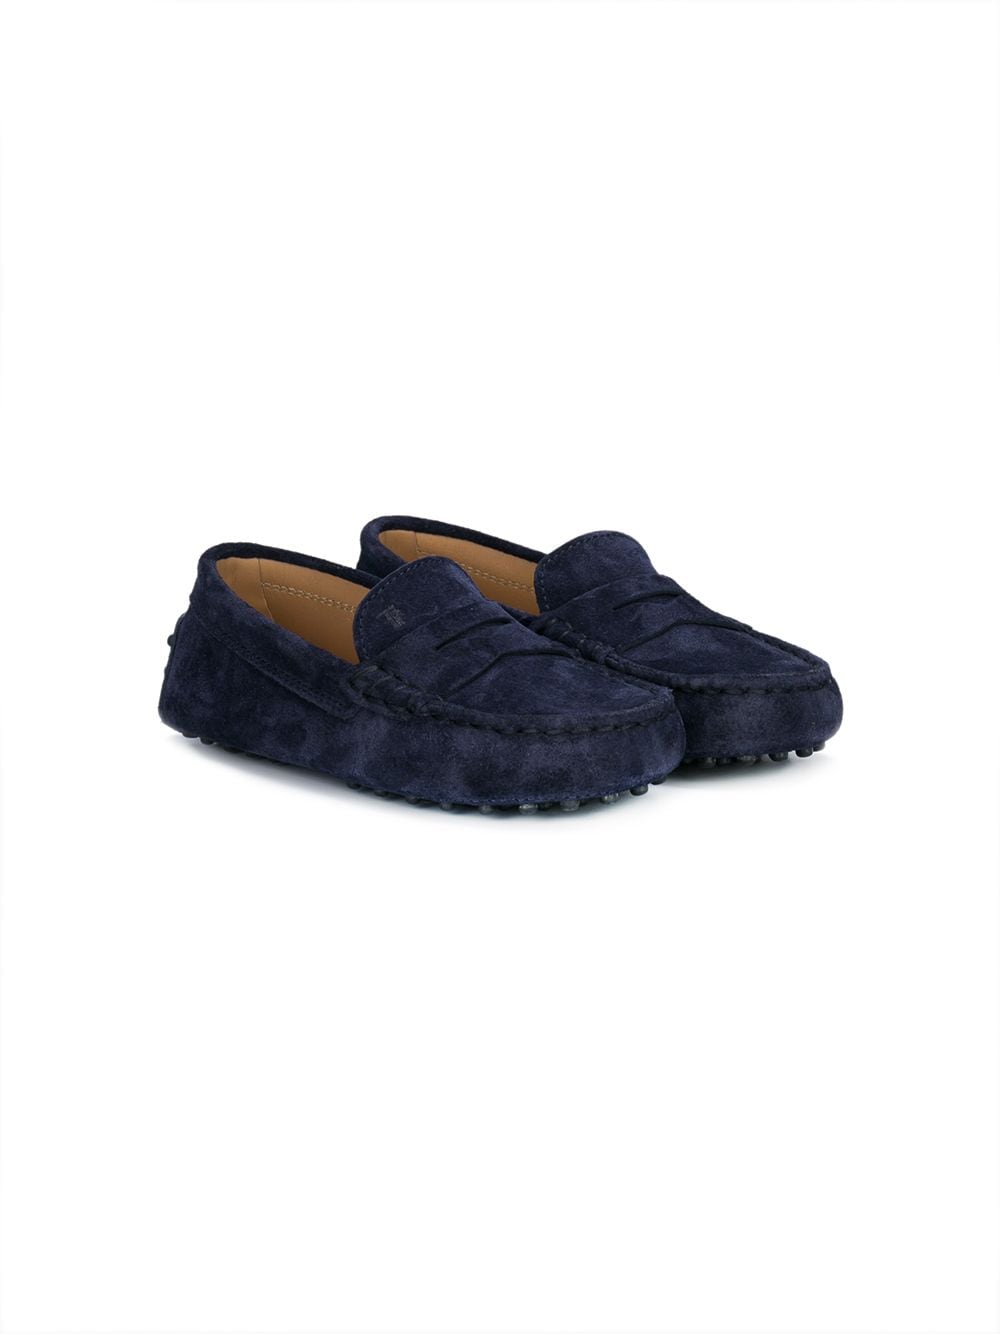 Blue leather moccasins for children